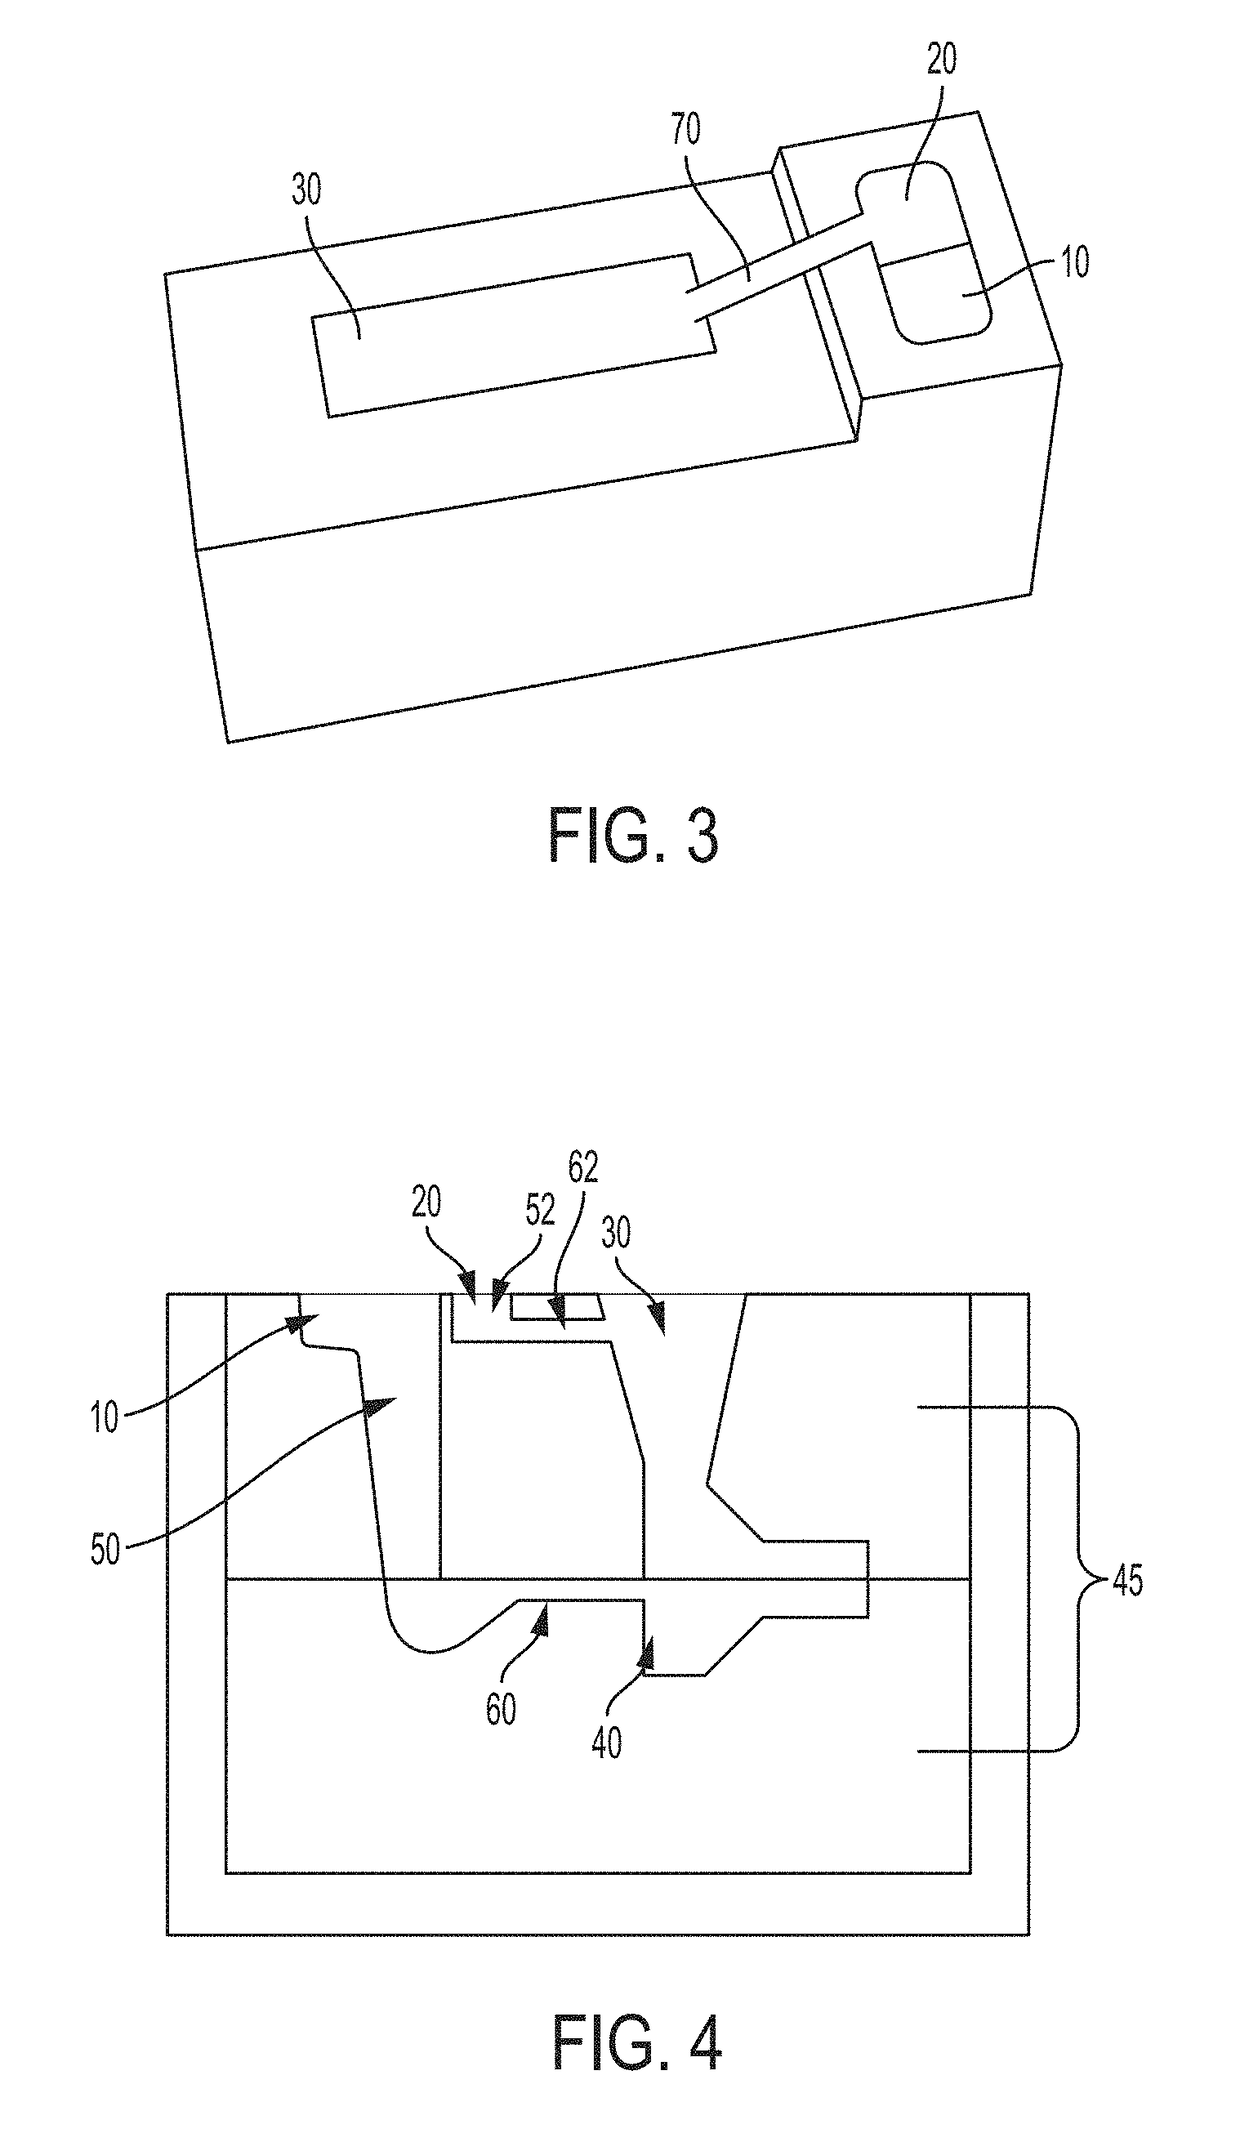 Method to improve riser feedability for semi-permanent mold casting of cylinder heads